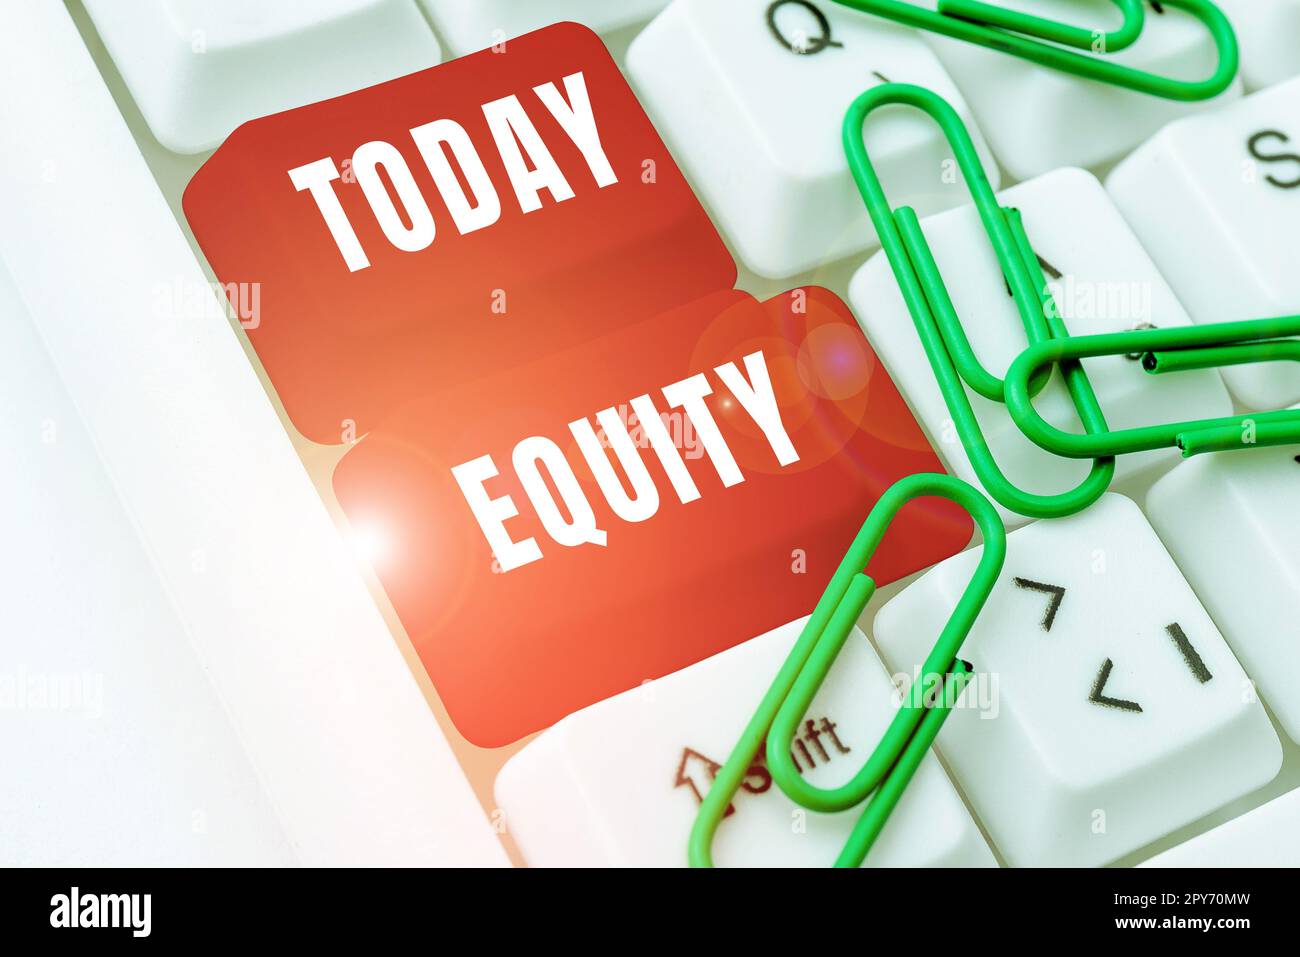 Sign displaying Equity. Word Written on quality of being fair and impartial race free One hand Unity Stock Photo